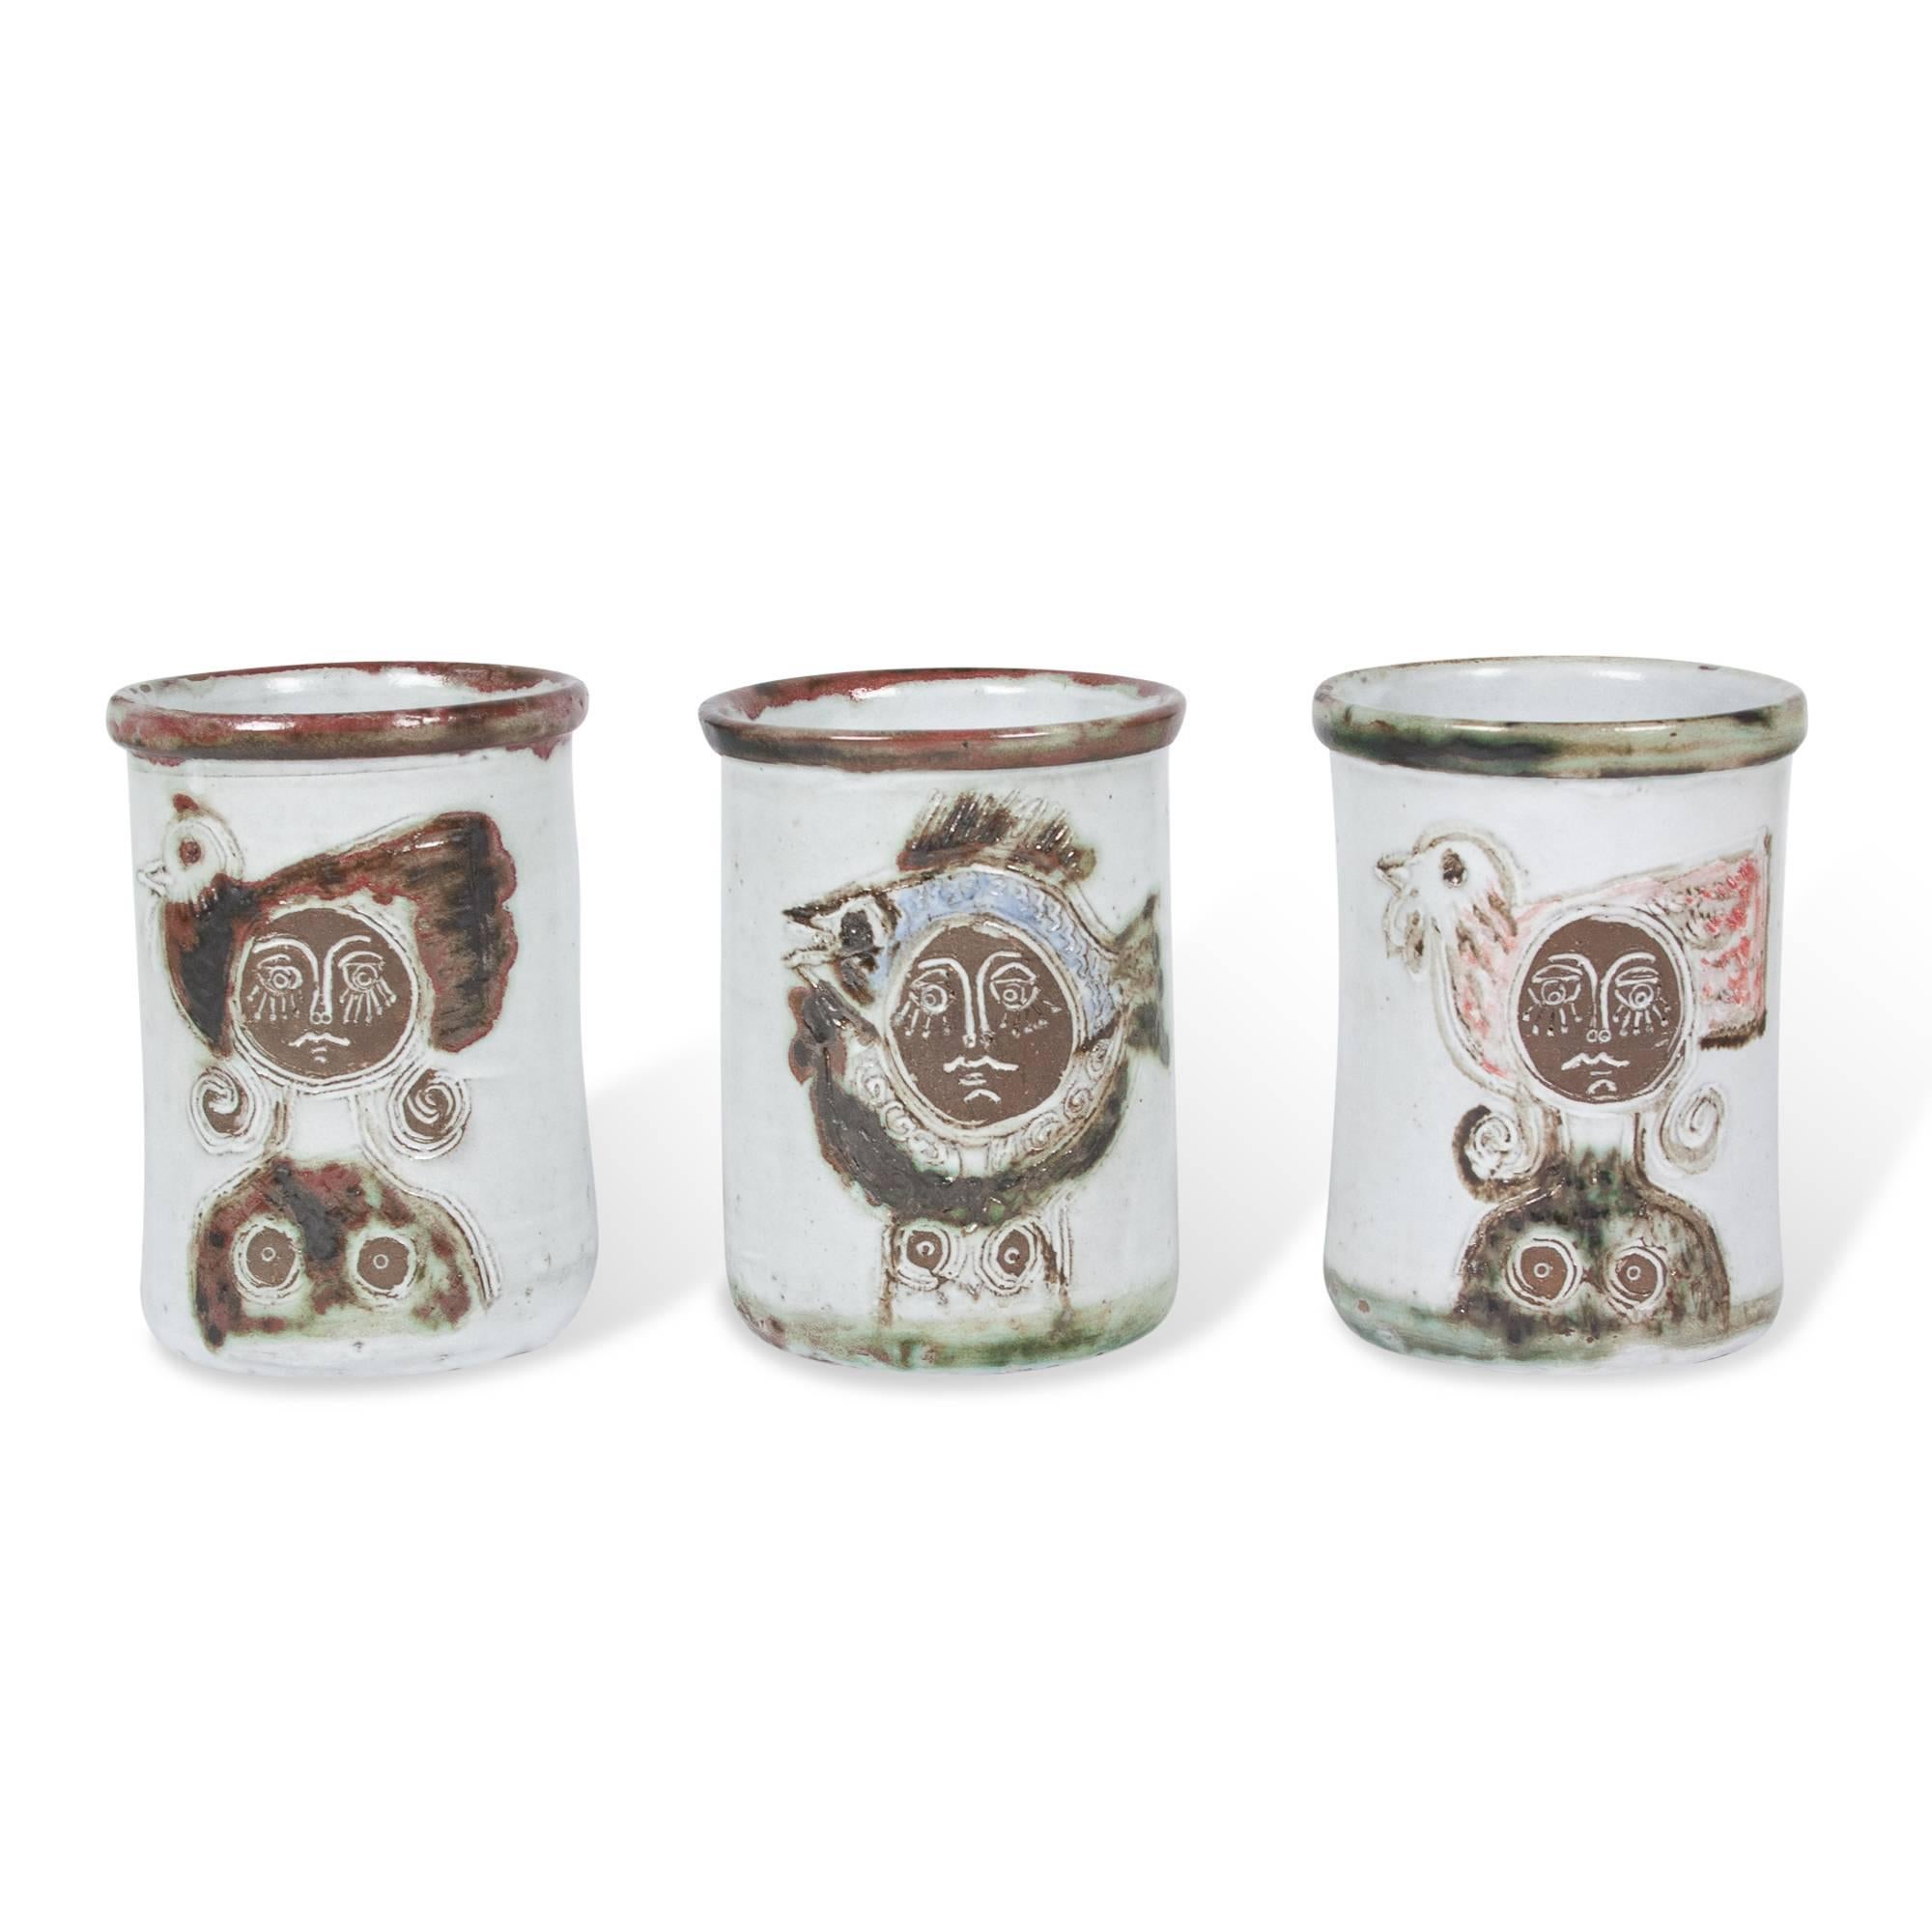 Glazed stoneware pots, each decorated with images of women and animals by Albert Thiry, French, circa 1950. Signature to underside. Measures: 4.5 in. D, 6 in. H.
   
Price for the set of three. Sold as a set or separately. Please inquire for